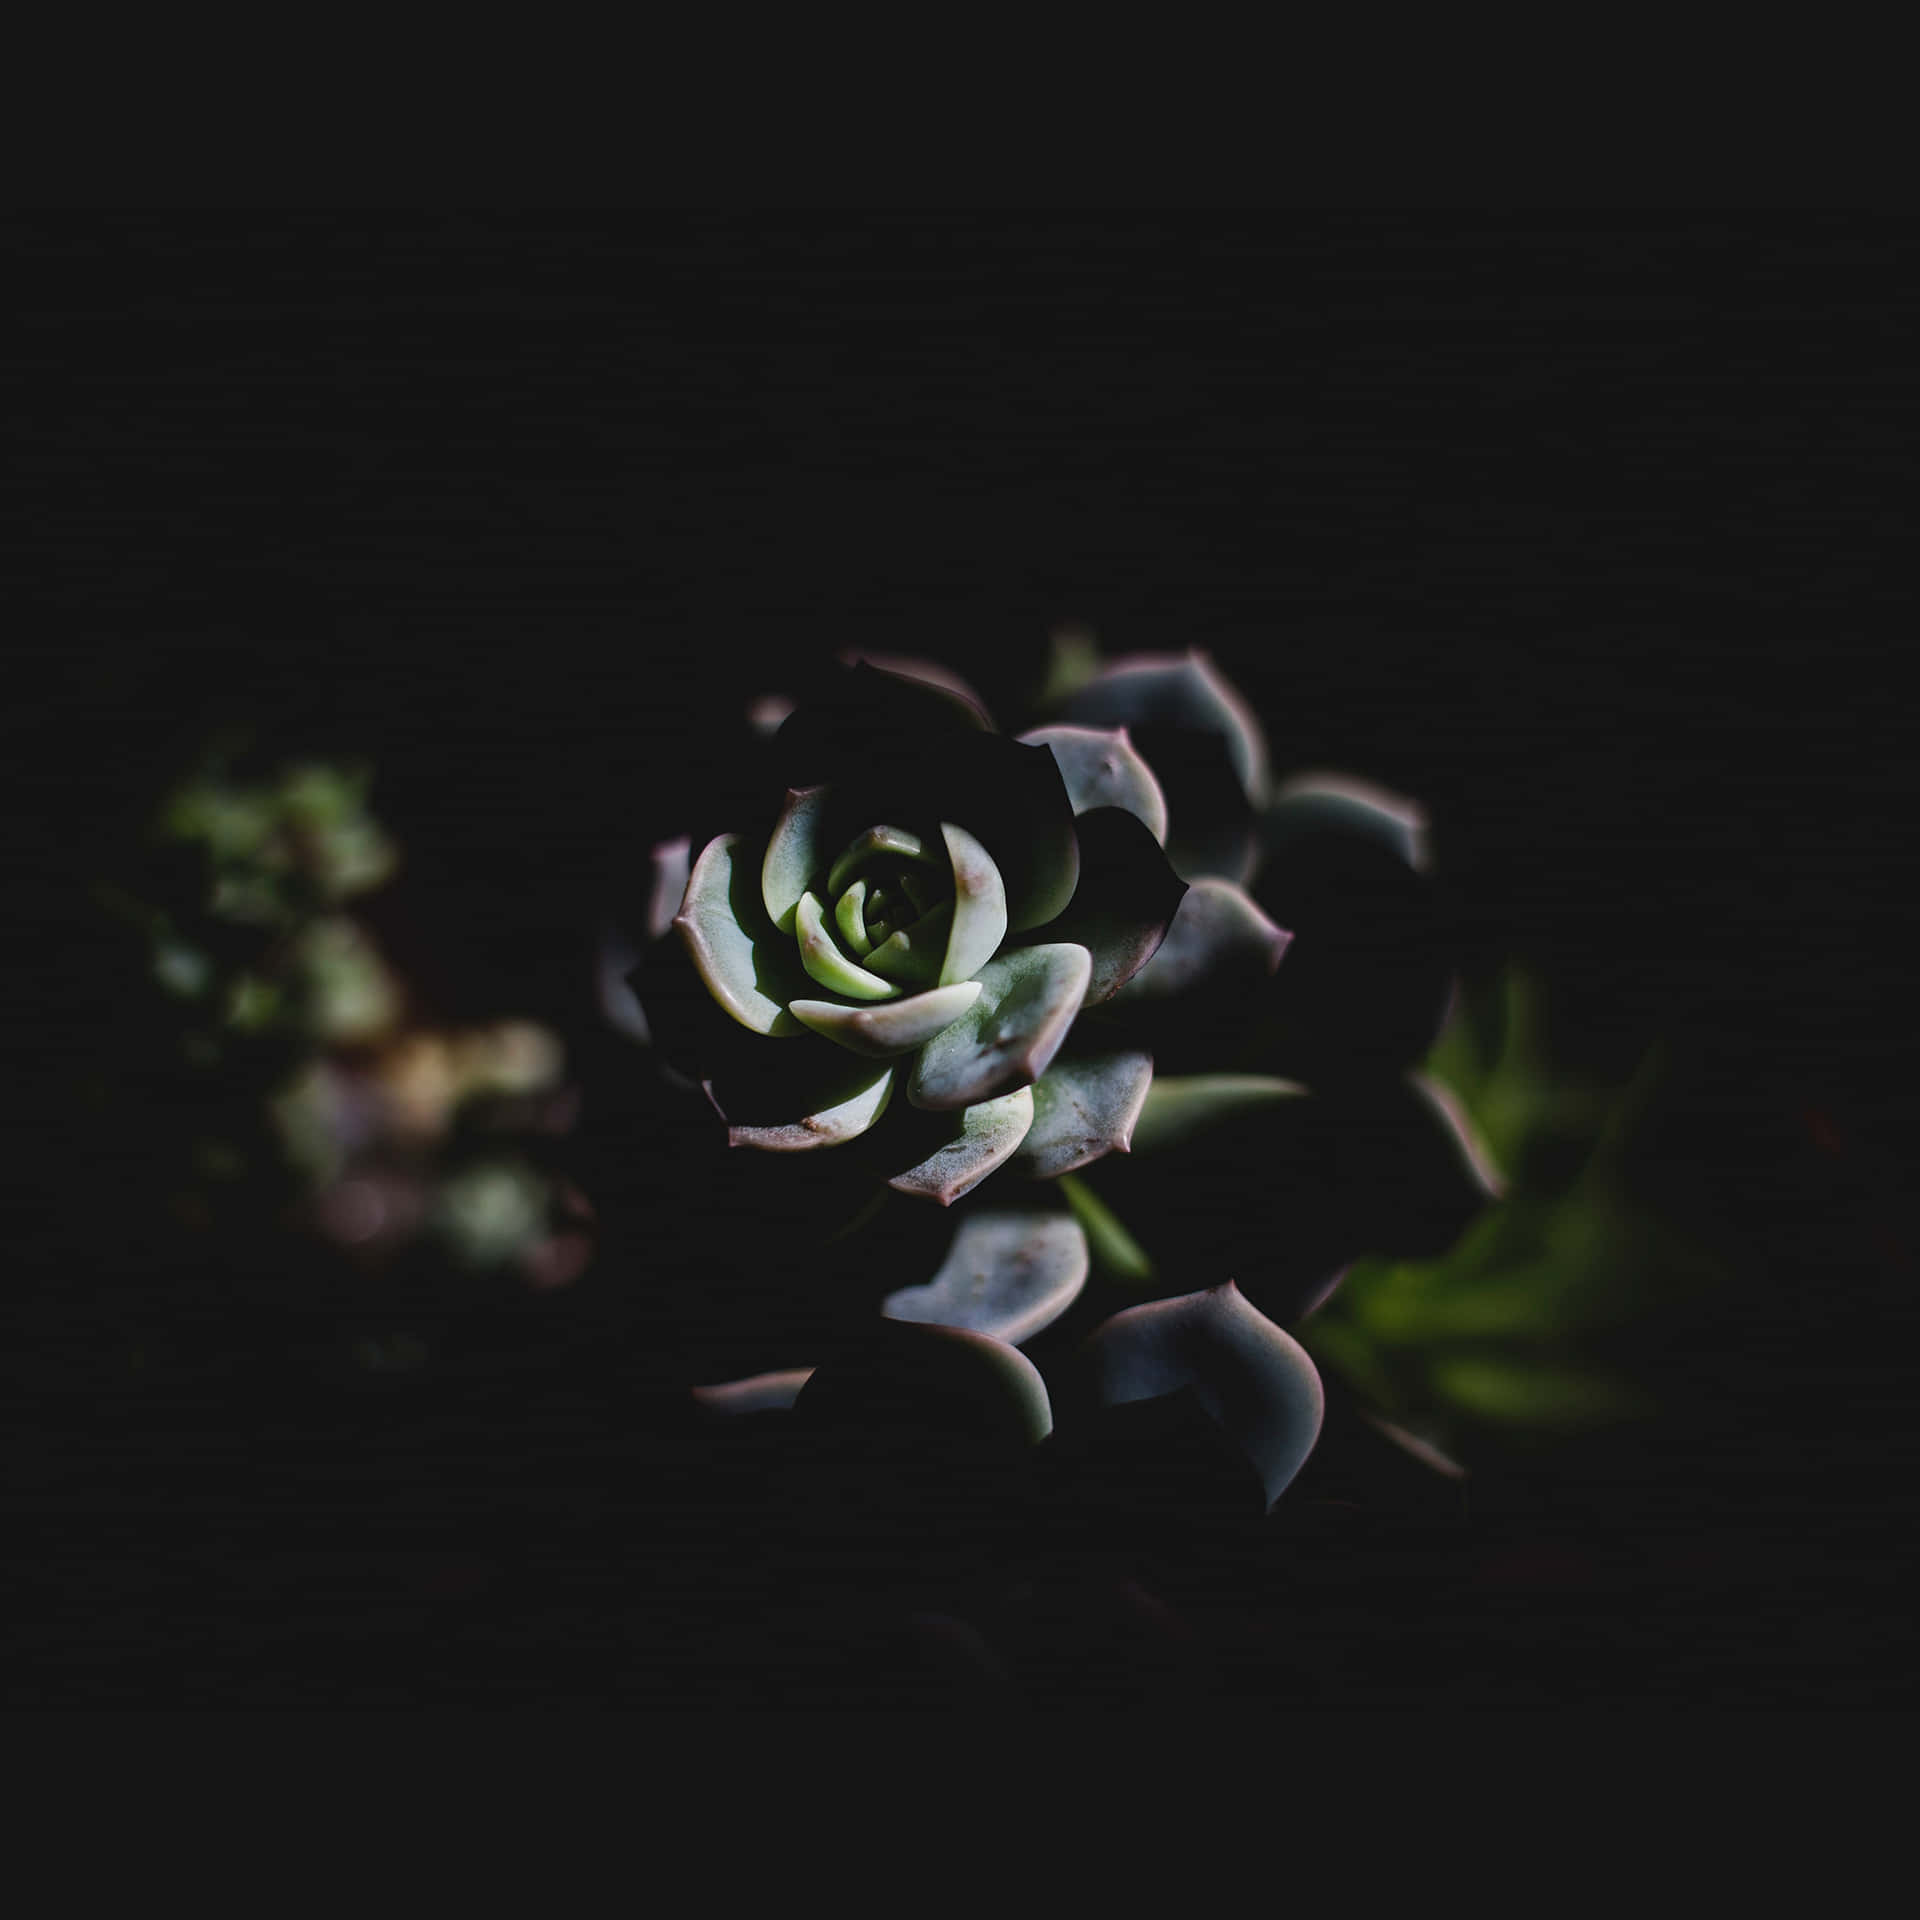 Blooming into the darkness Wallpaper